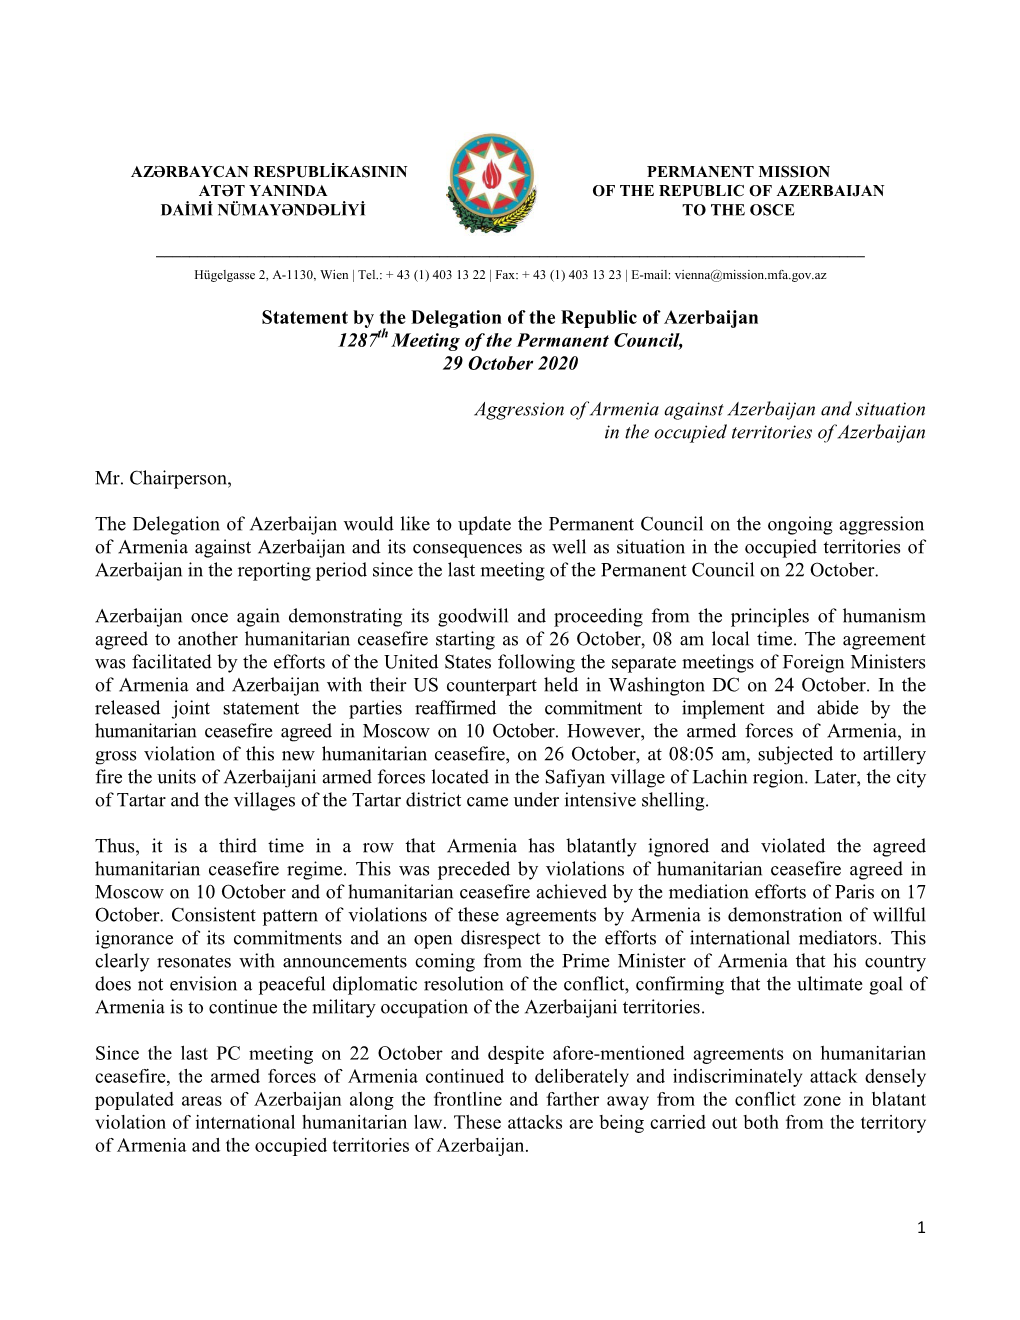 Statement by the Delegation of the Republic of Azerbaijan 1287 29 October 2020 Meeting of the Permanent Council, Aggression of A